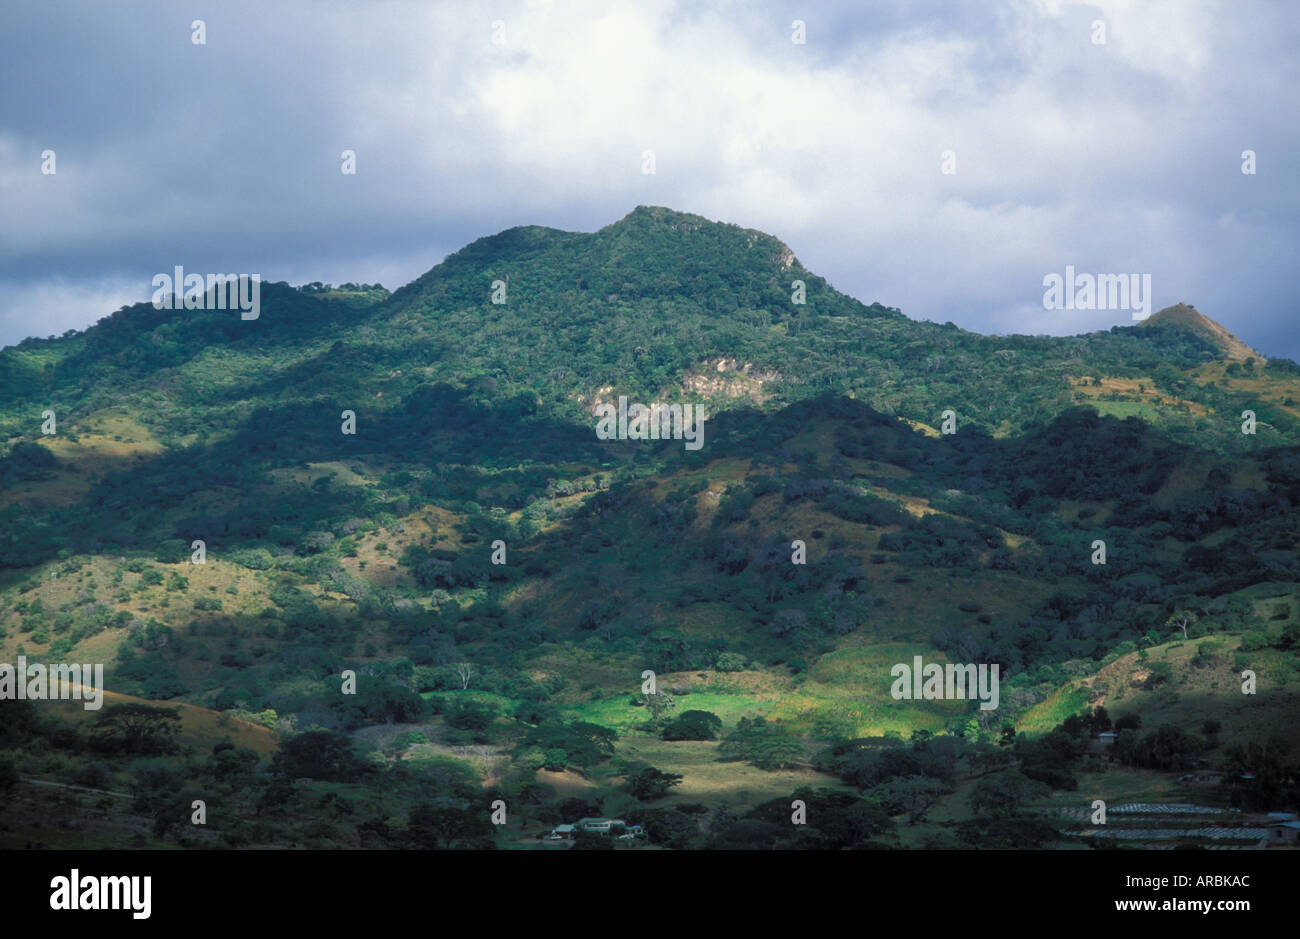 Forested Mountains and cleared agricultural land in mountains along road between Matagalpa and Jinotega Nicaragua Stock Photo